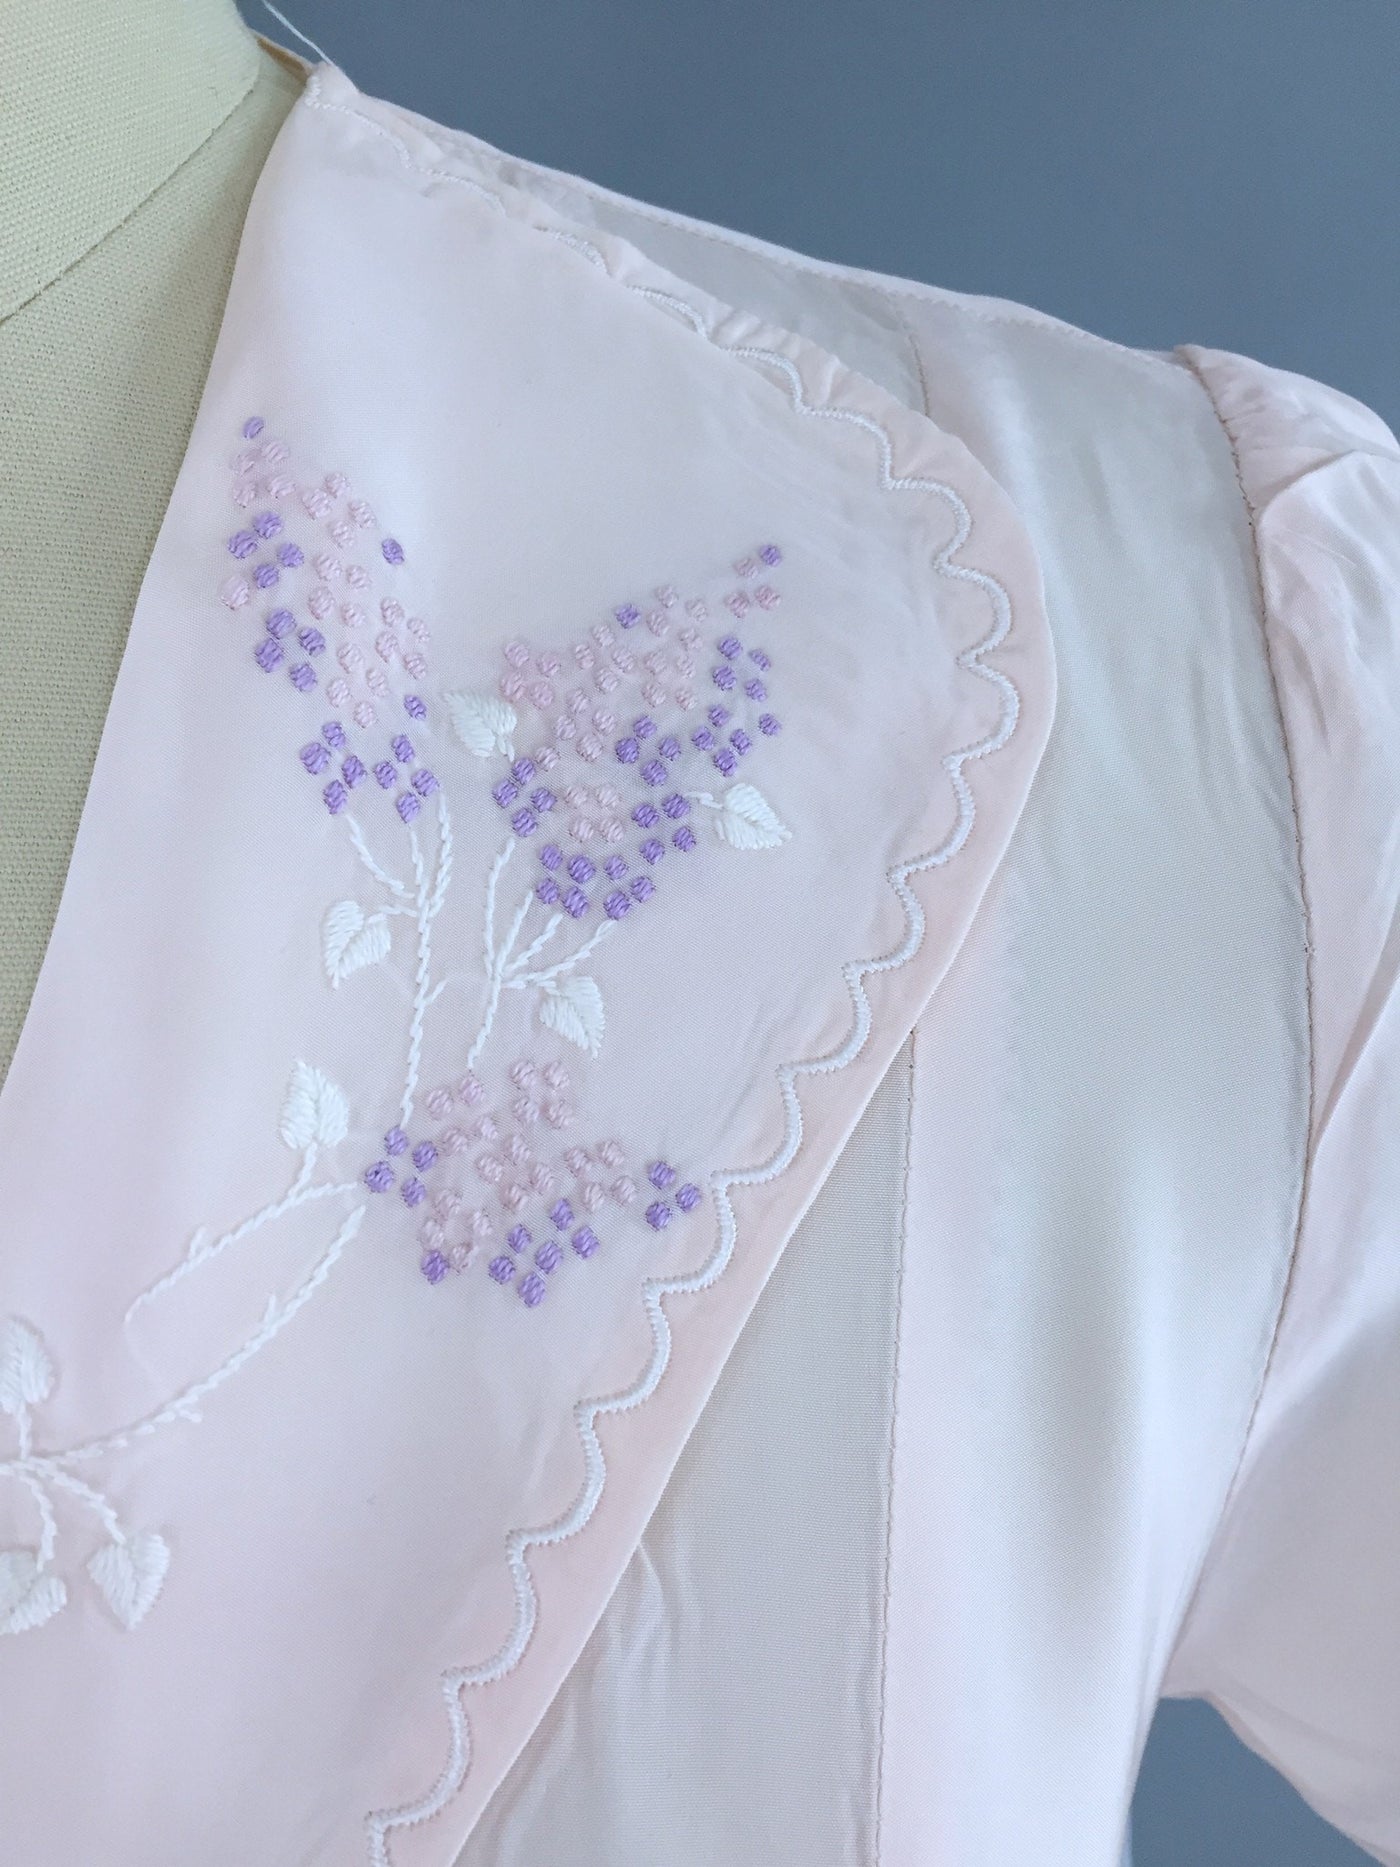 Vintage 1930s Artemis Bias Cut Pink Embroidered Rayon Crepe Nightgown - ThisBlueBird